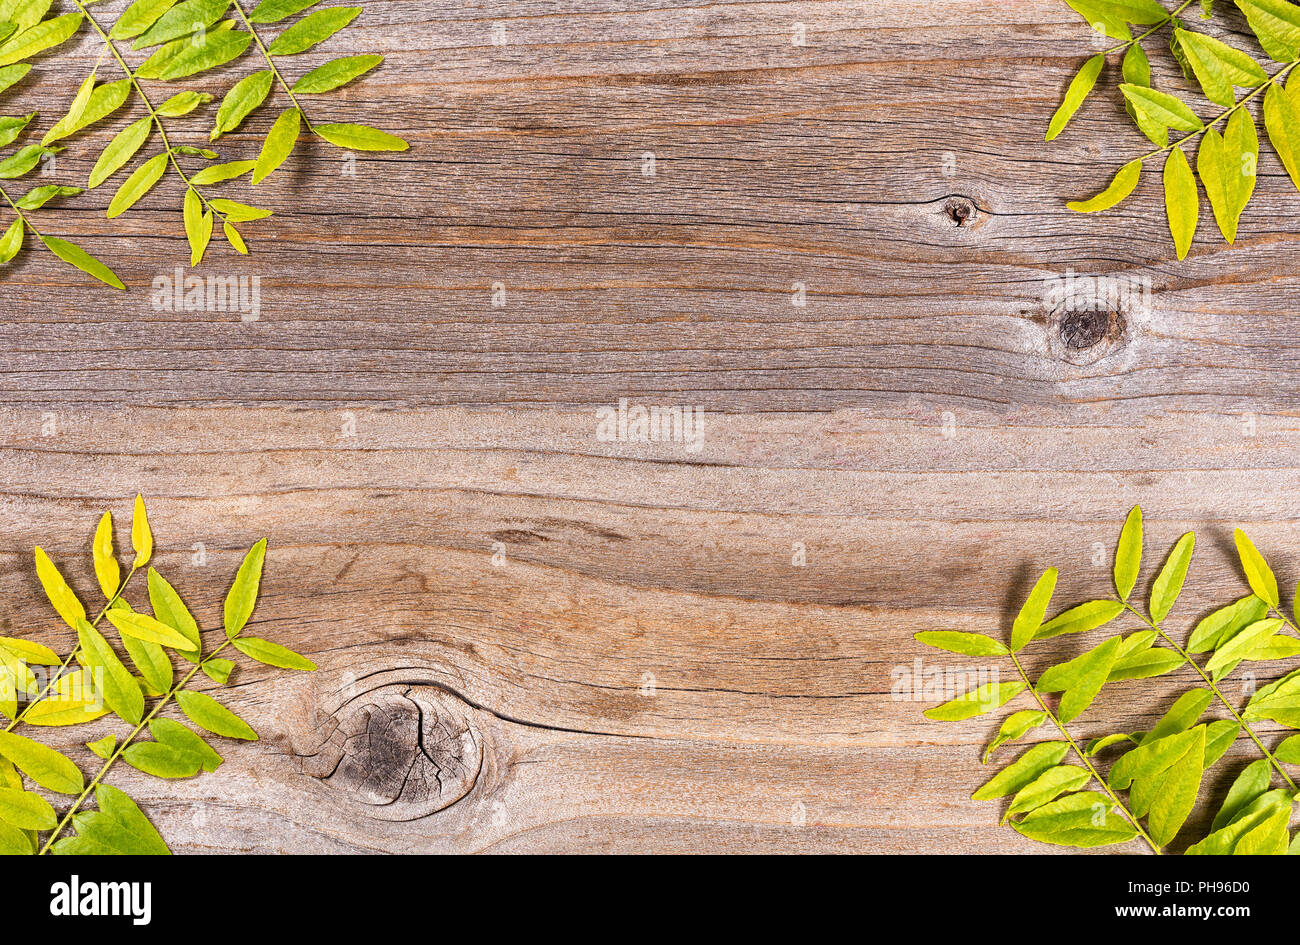 Small leaves in all corners of rustic wooden board Stock Photo